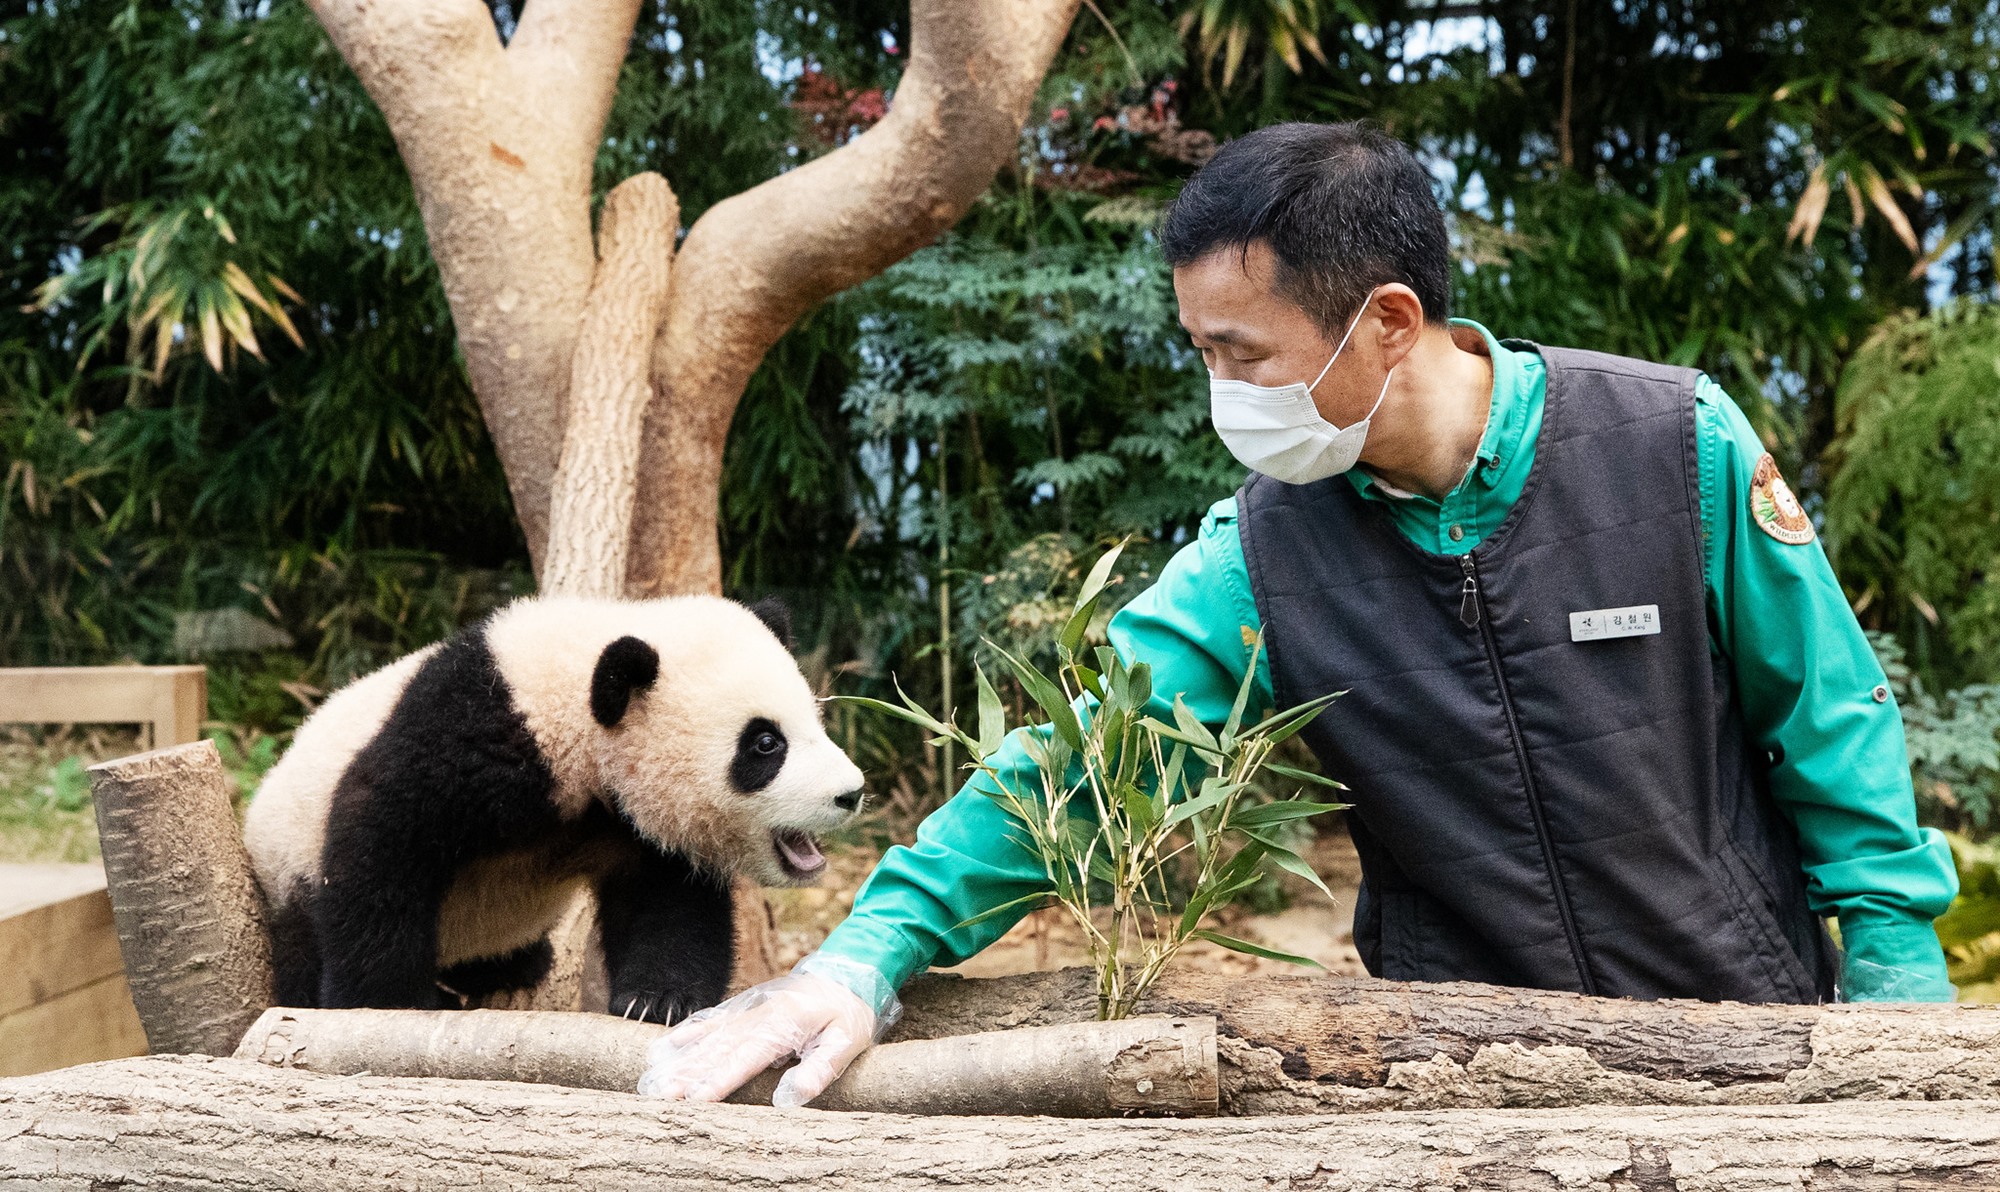 Fu Bao, the first giant panda born in Korea via natural breeding on July 20, 2020, is enjoying popularity in China after being moved there. Shown are Fu Bao at six months old and her zookeeper Kang Cher-won in January 2021 at the theme park and zoo Everland in Yongin, Gyeonggi-do Province, at the time of Korea.net's coverage of the animal. (Korea.net DB)